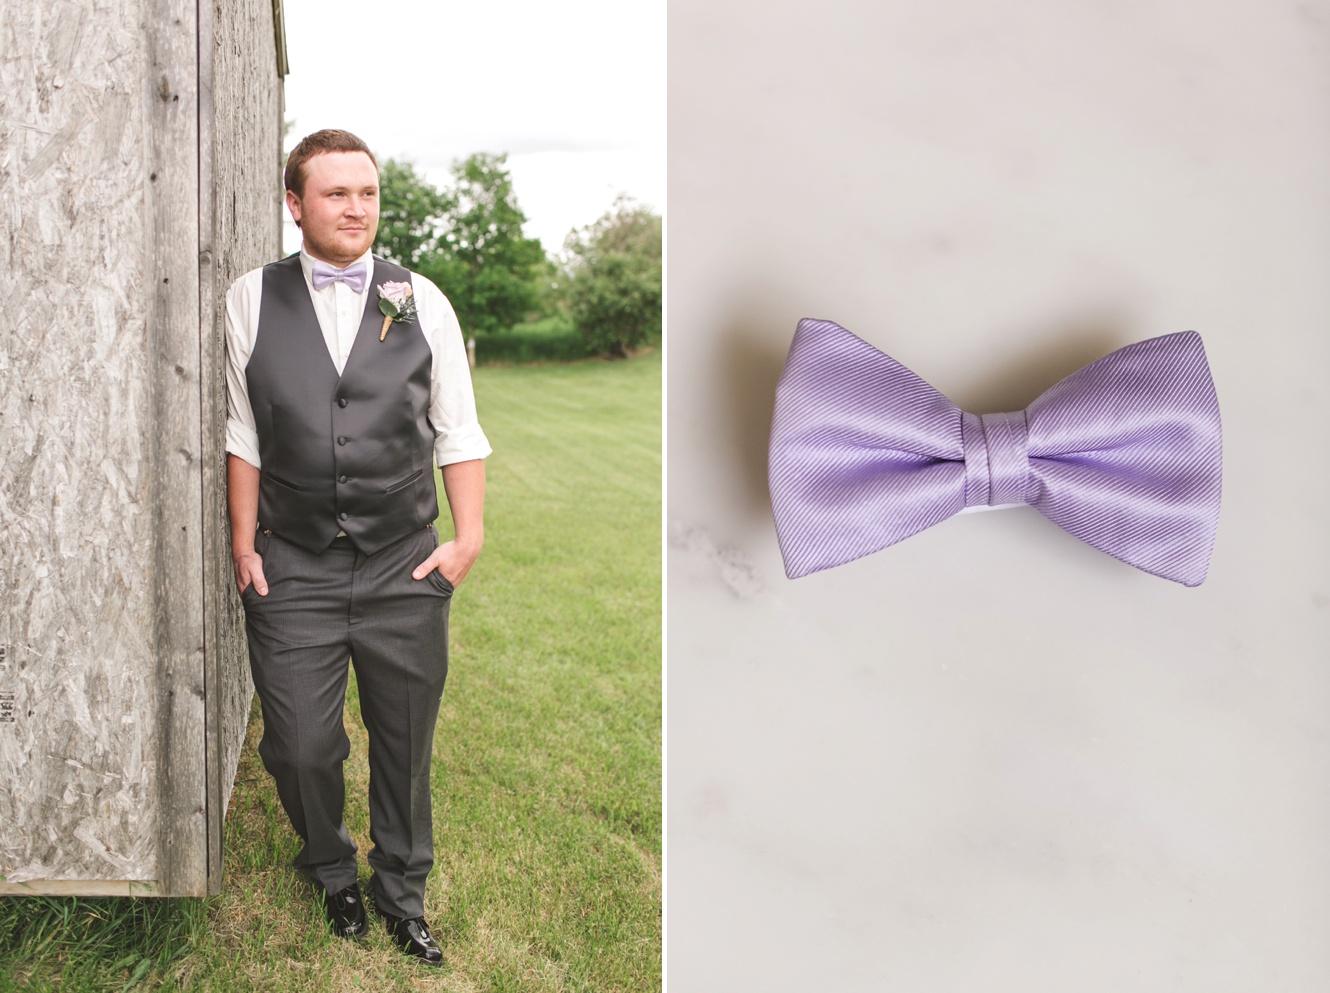 The groom wore a lilac bowtie